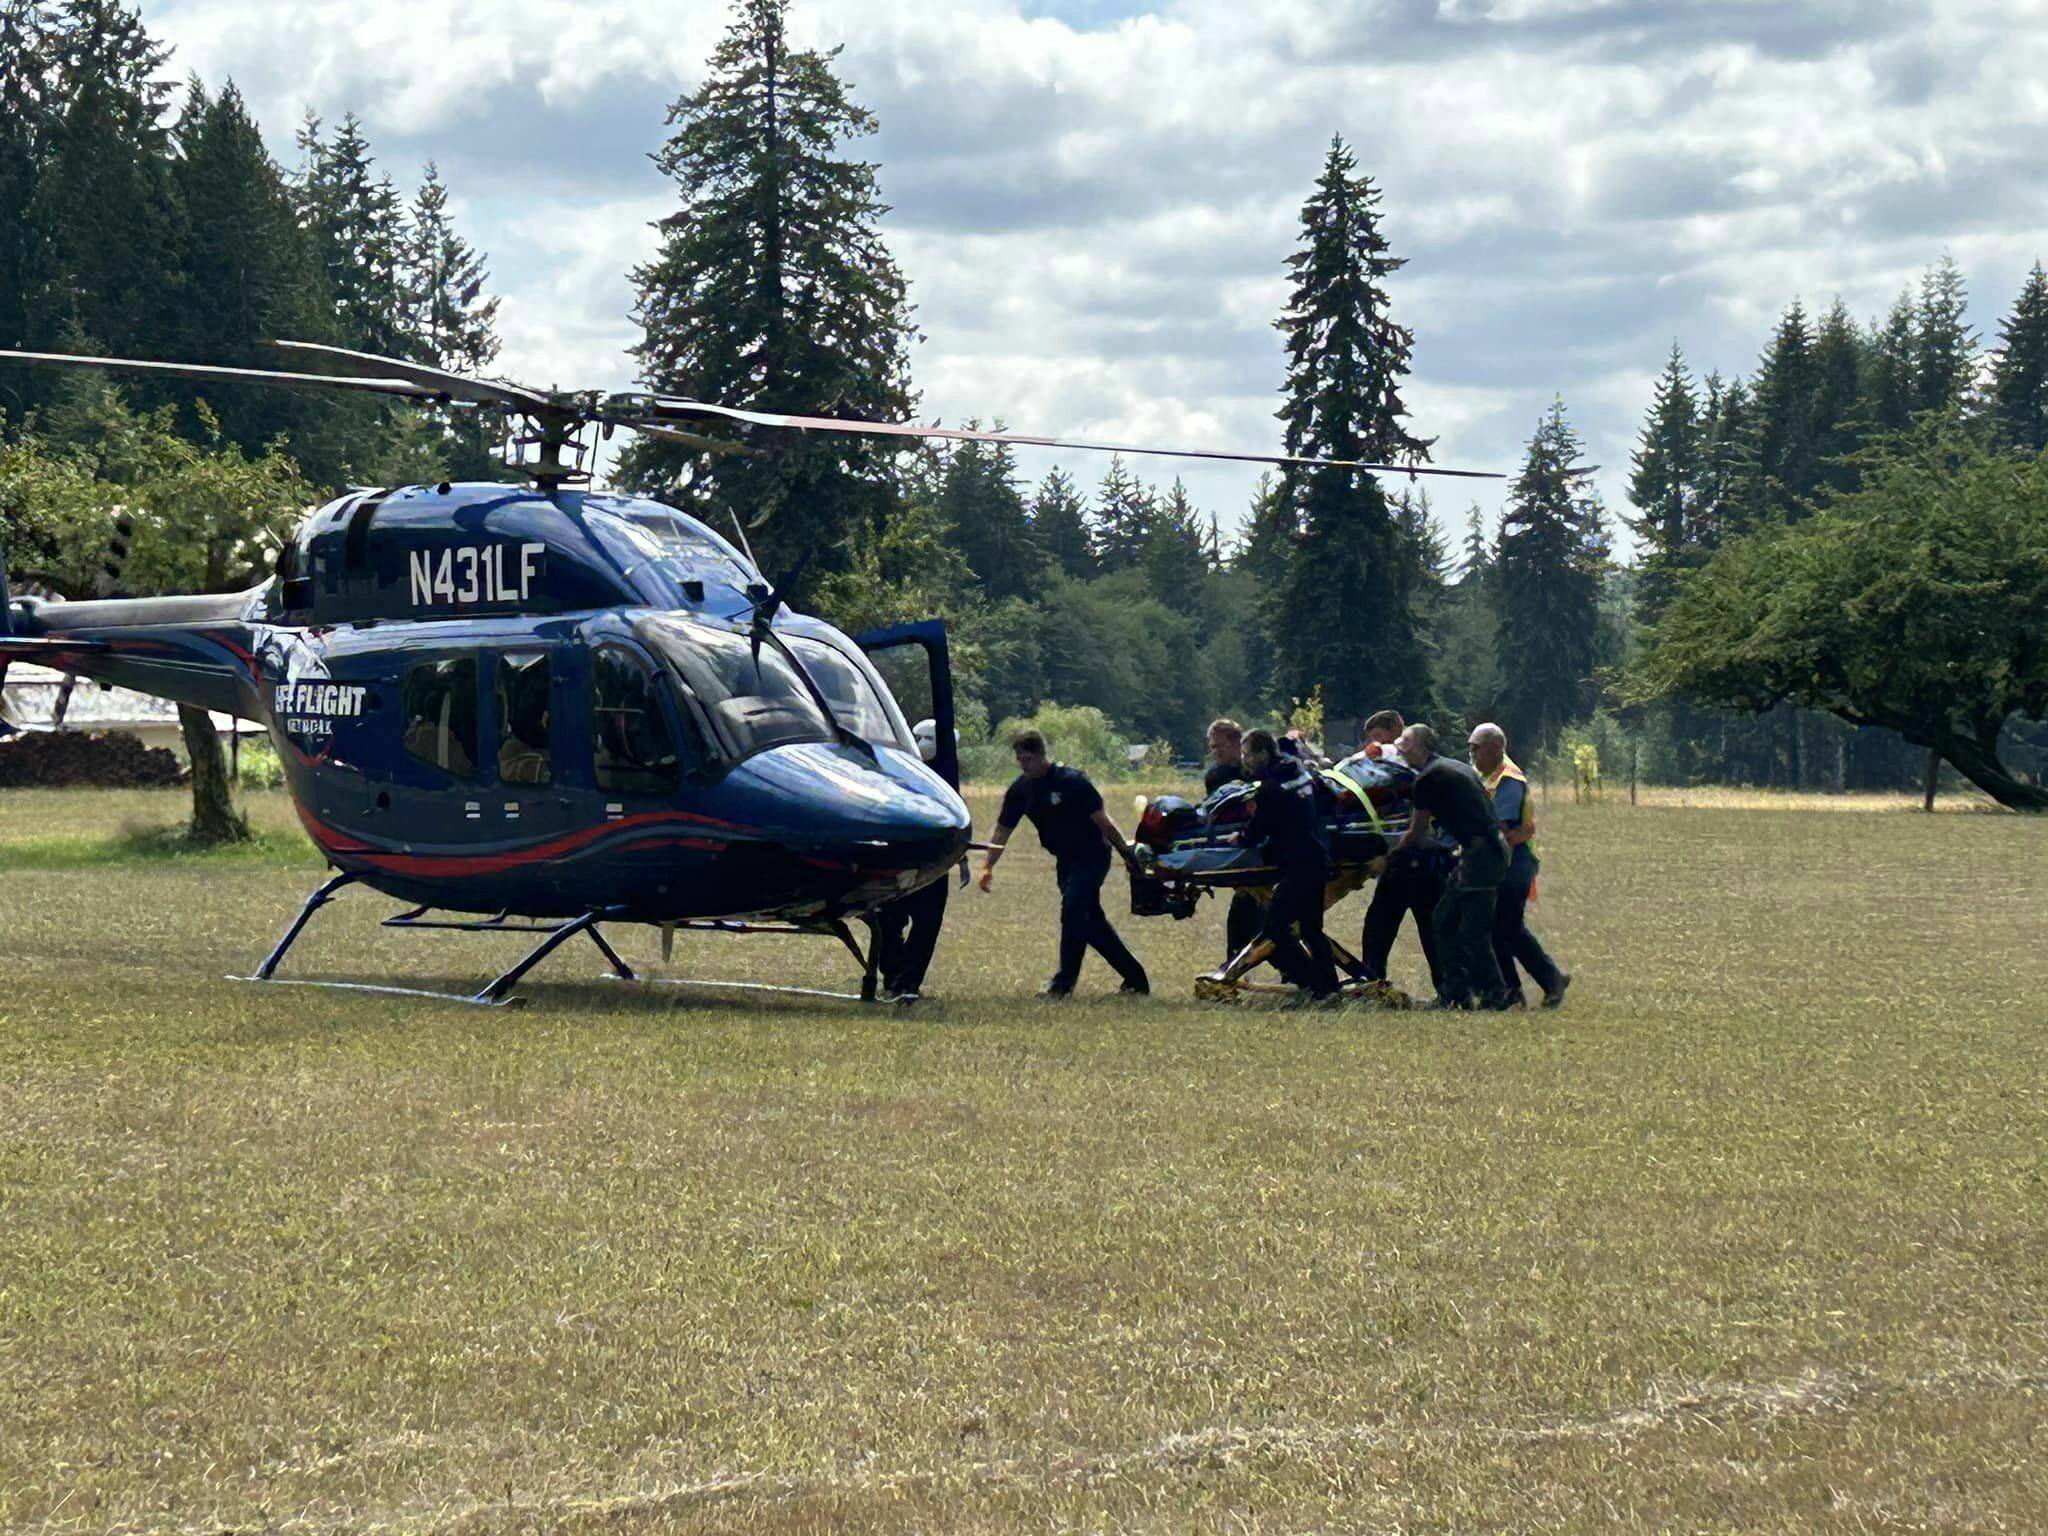 Grays Harbor Fire District 10 and Aberdeen Fire Department personnel responded to a motorcycle crash involving multiple victims on Saturday afternoon, requiring one to be medevac’d for critical injuries by Life Flight Network. (Courtesy photo / The Daily World)